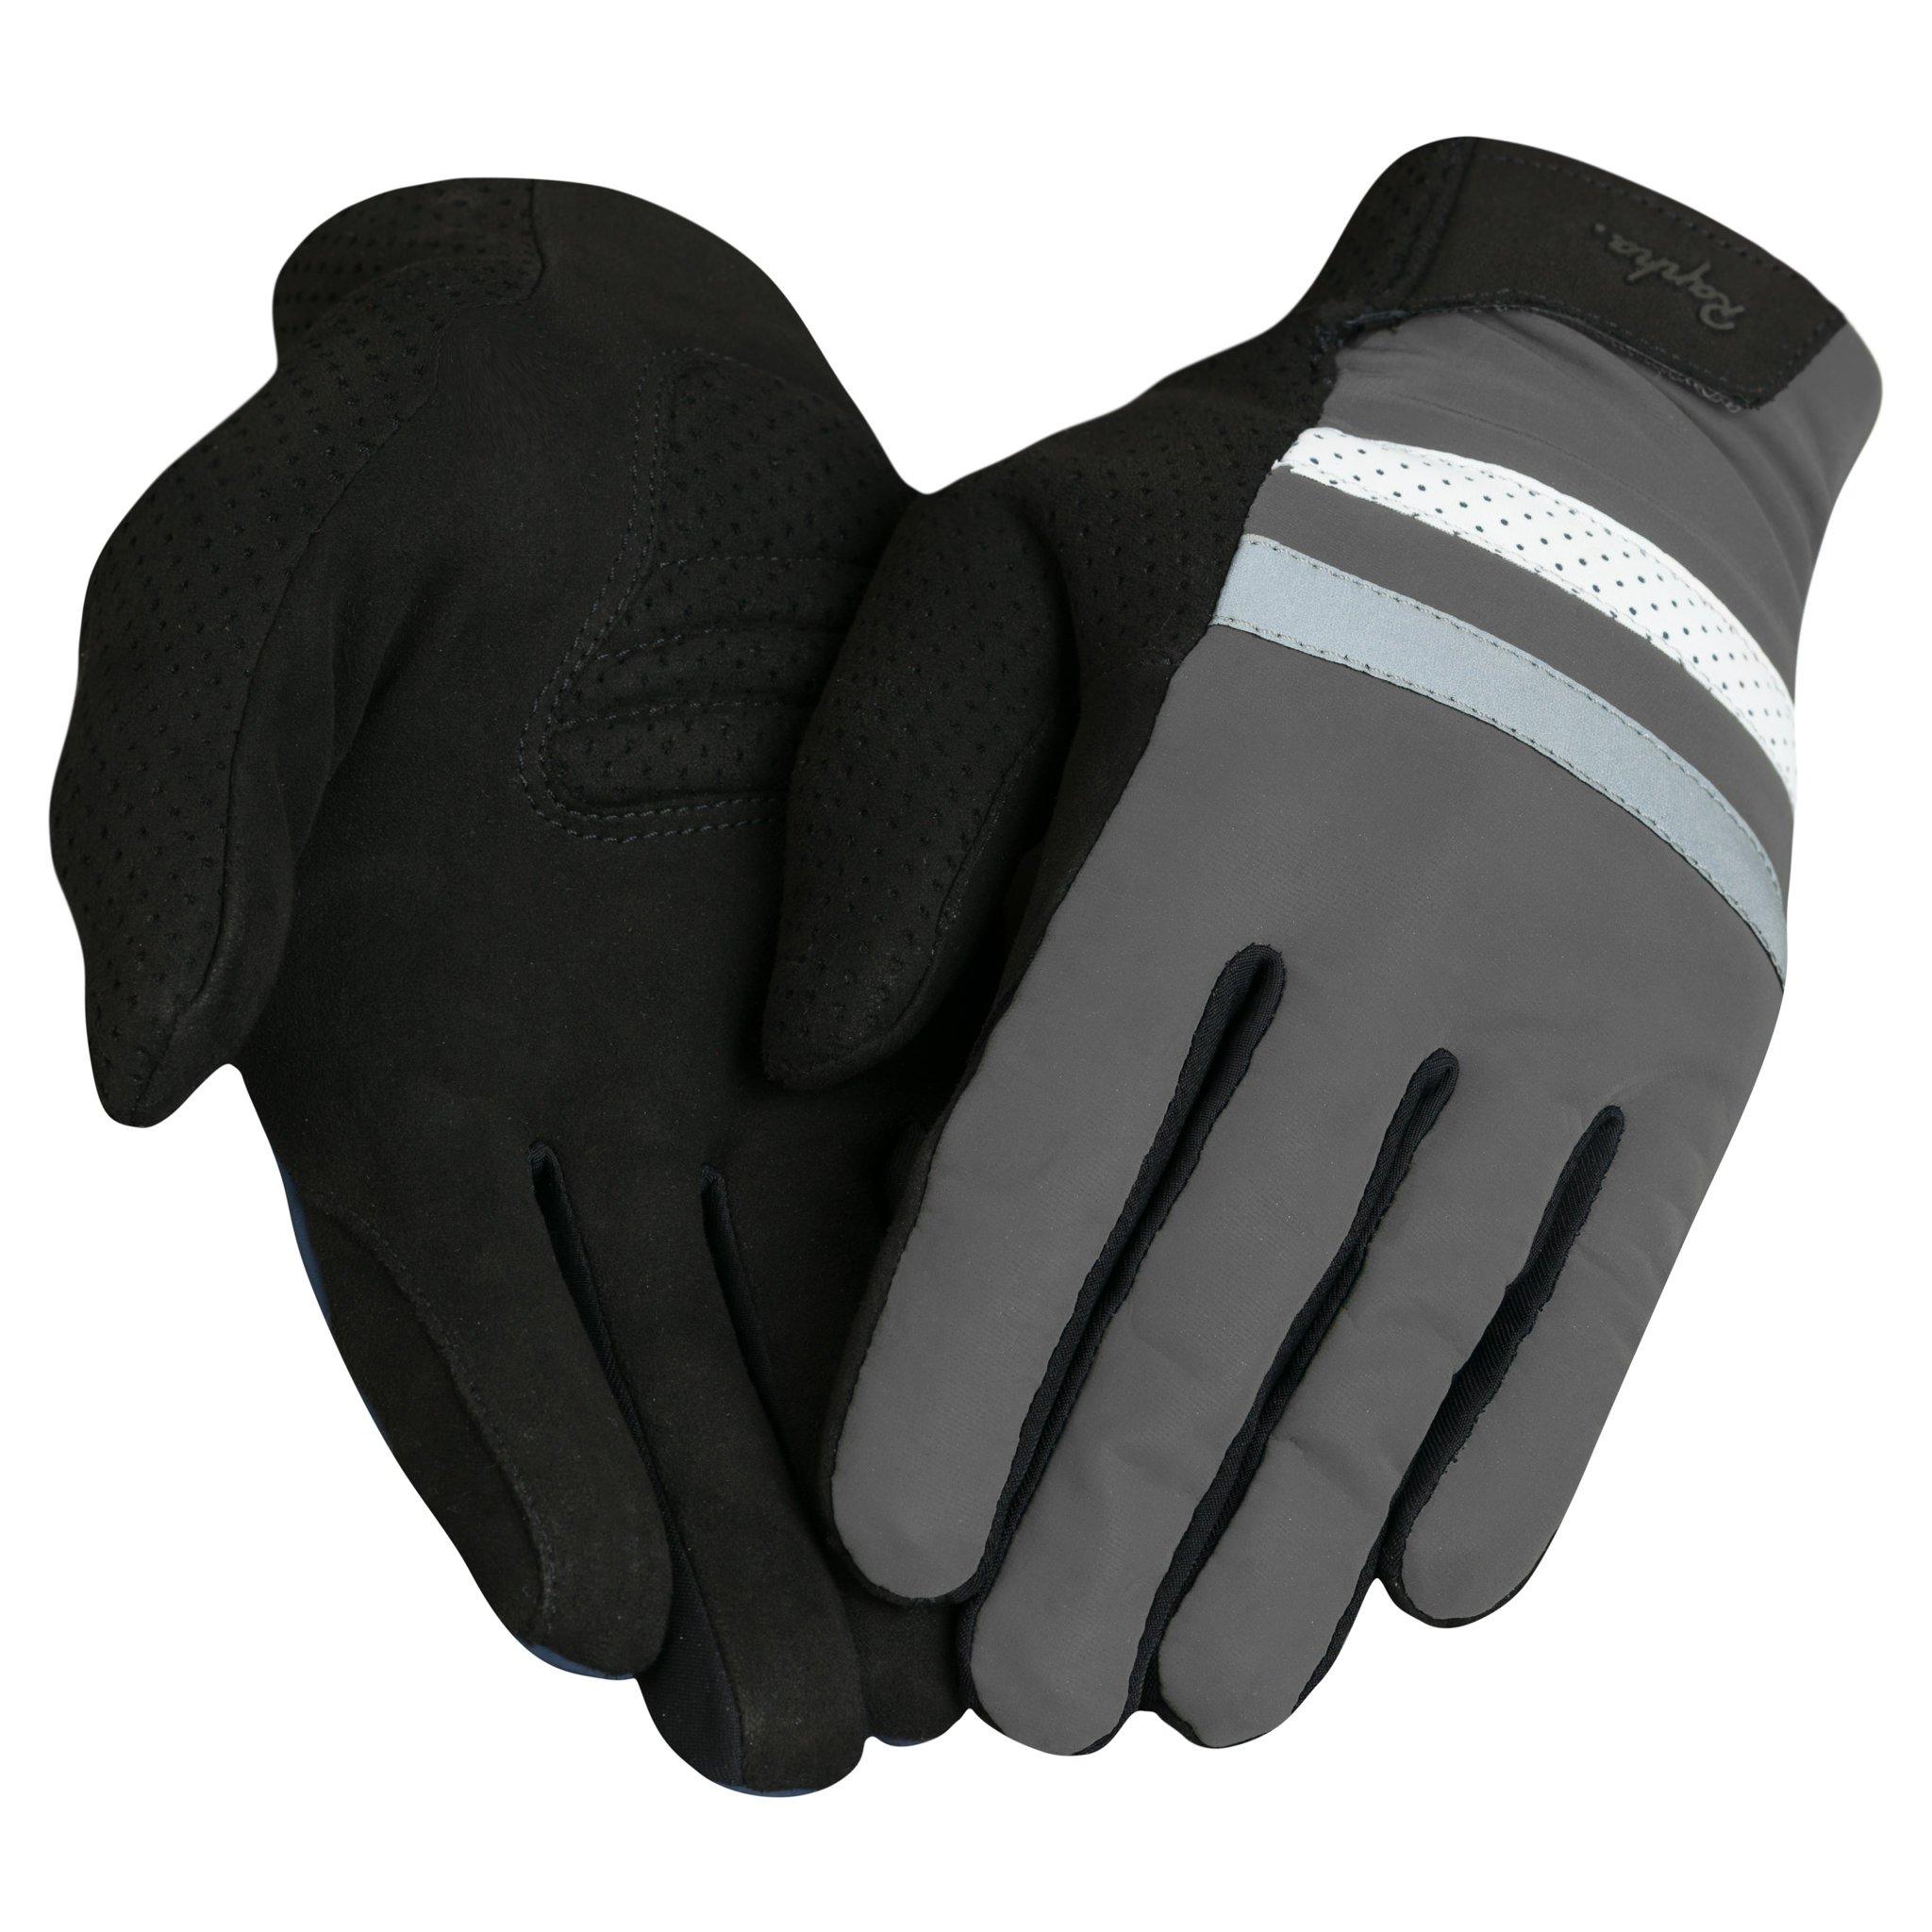 Brevet Reflective Gloves | Men's Reflective Cycling Gloves for Winter  Riding and Commuting | Rapha